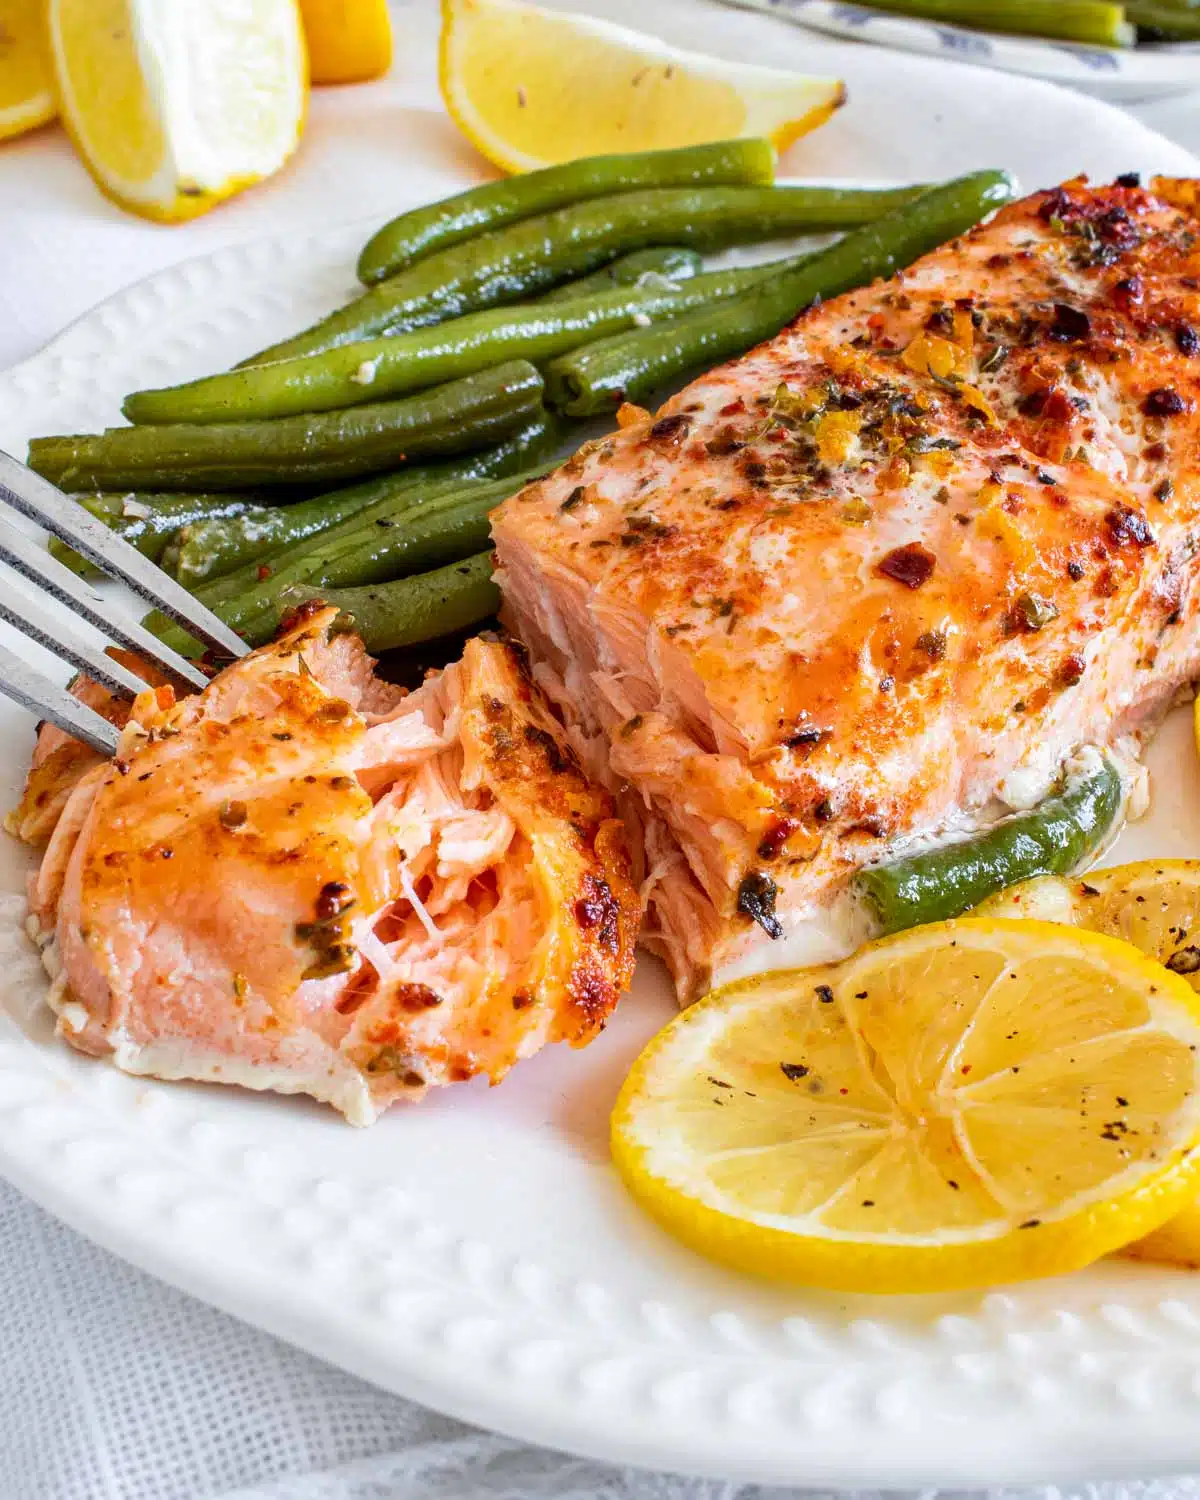 salmon and green beans with a lemon slice on a plate.